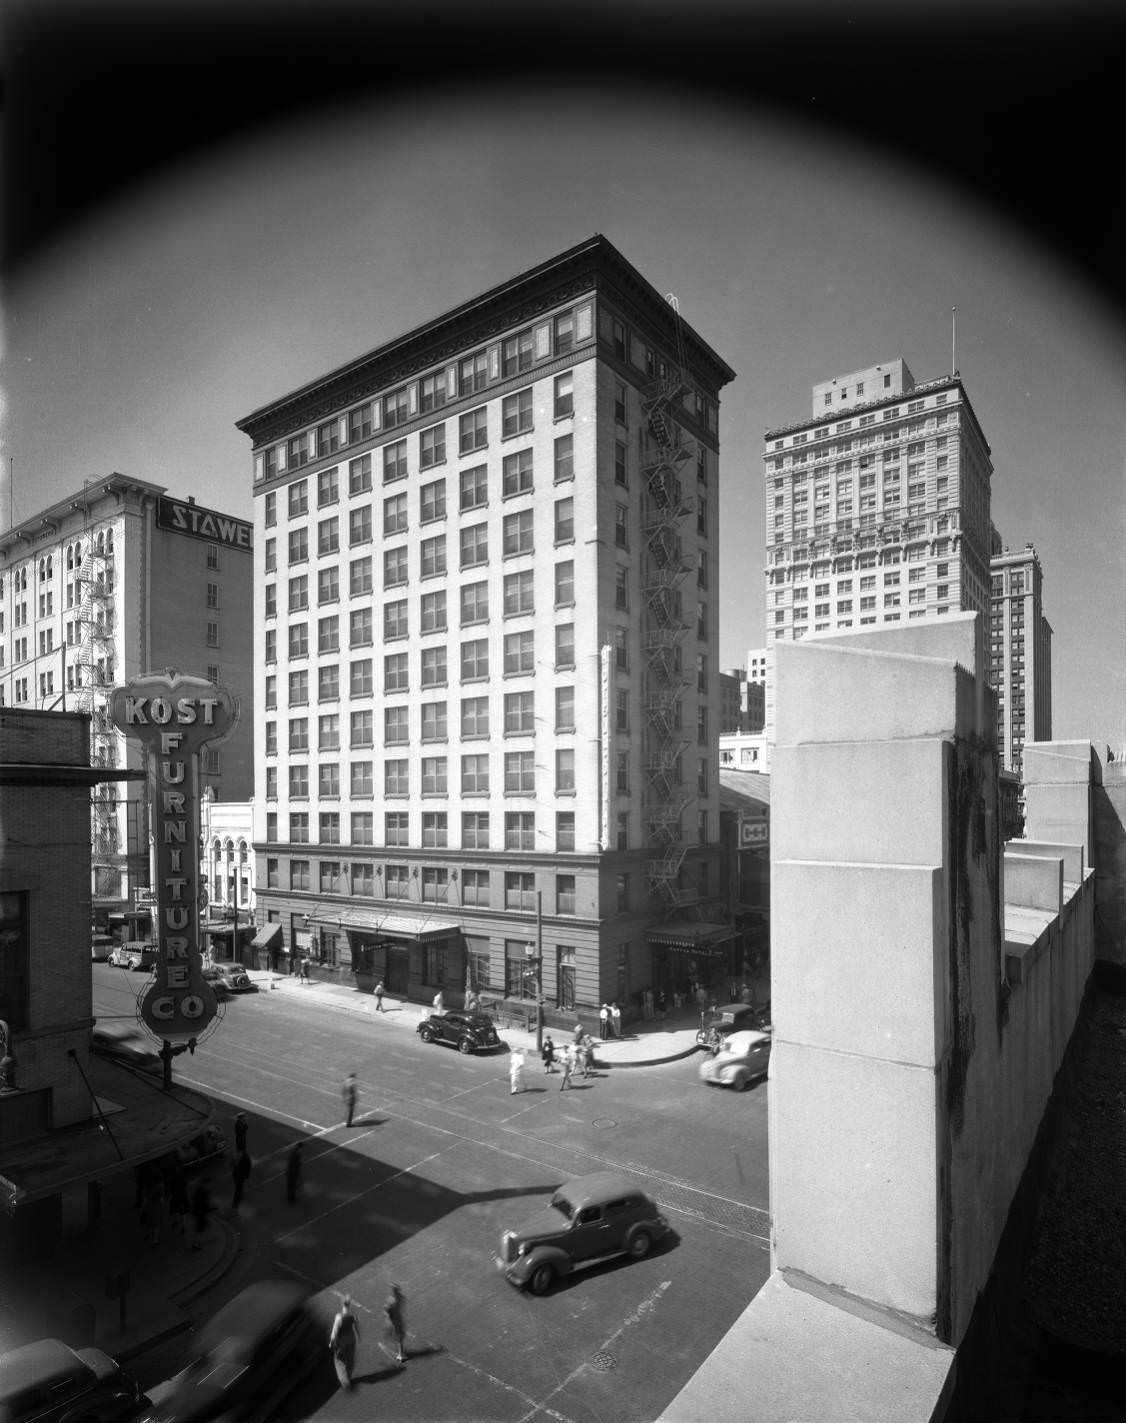 Cotton Hotel, later Montague Hotel, at 802-08 Fannin and 1018-20 Rusk, Houston, Texas, 1940.